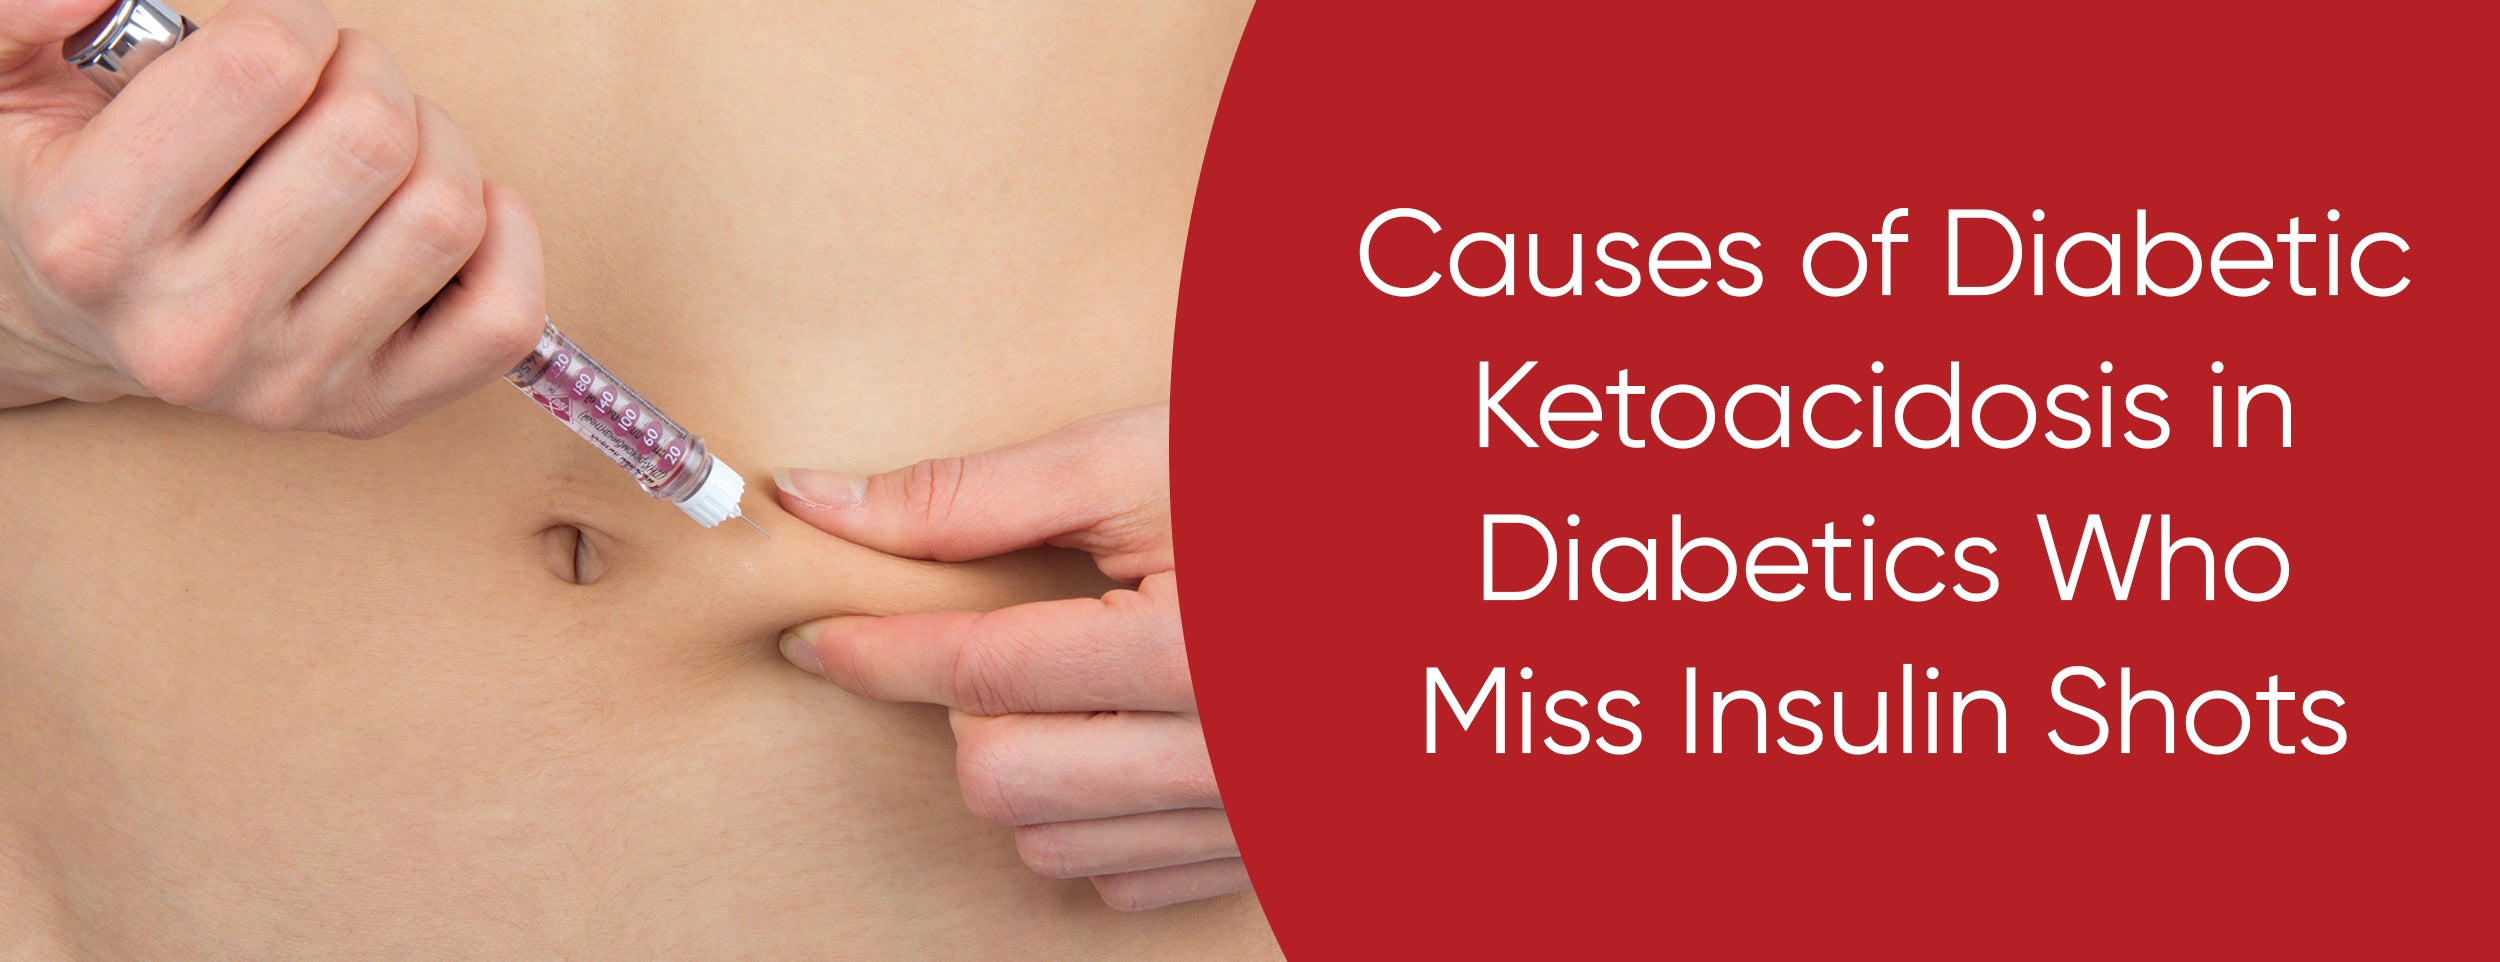 Missed insulin injections in diabetic ketoacidosis